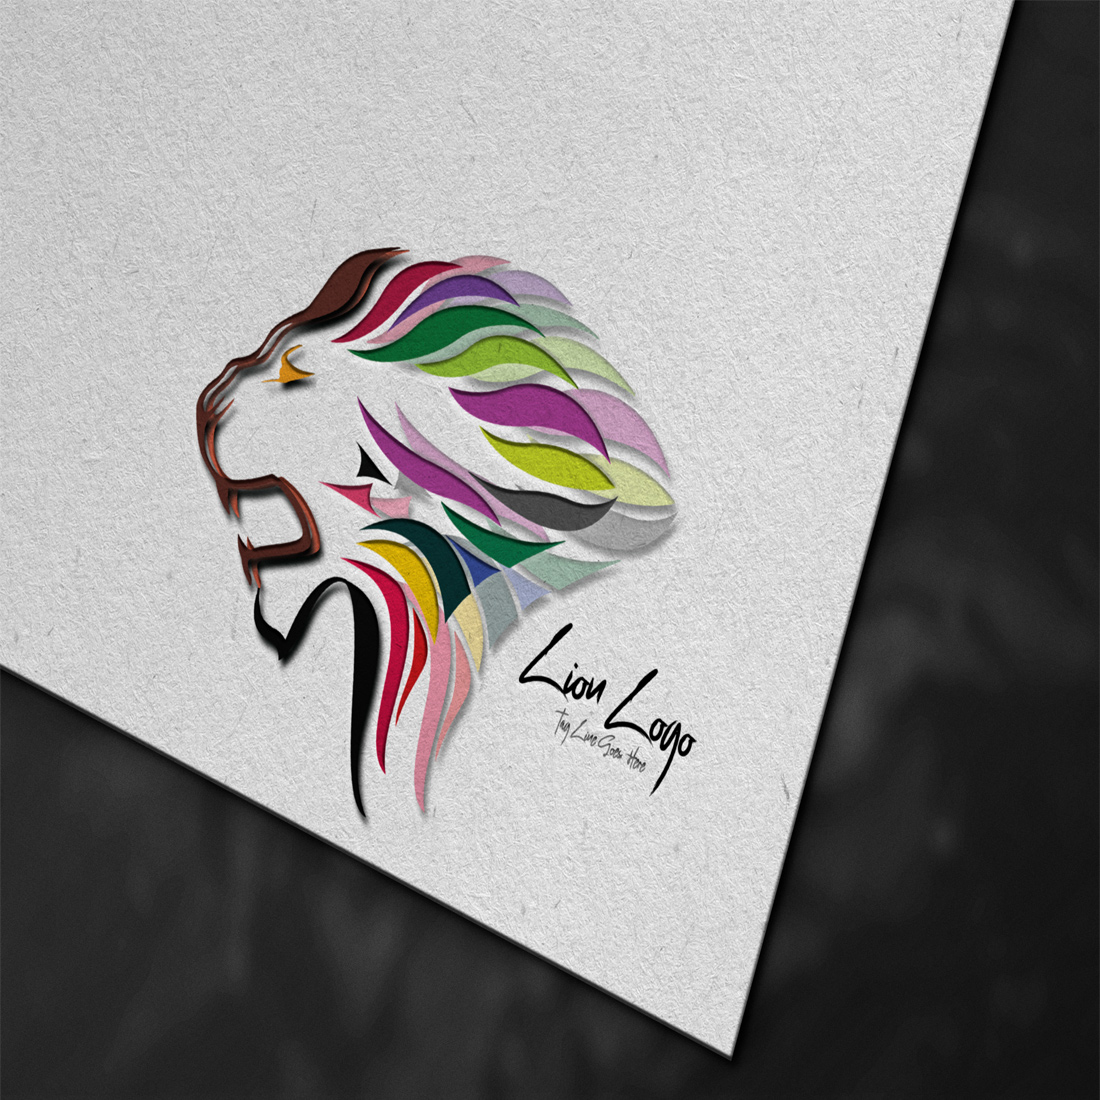 Colorful lion logo on a white background.